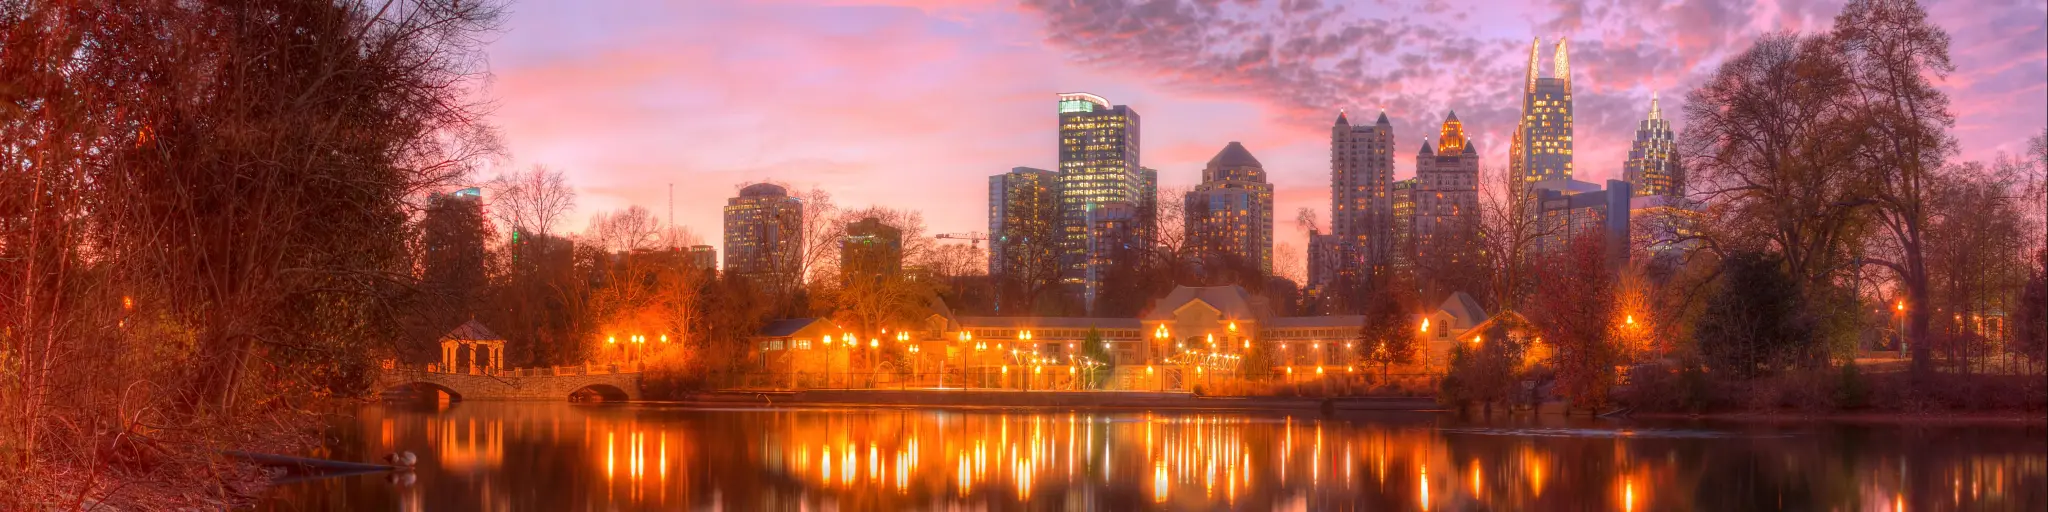 Panoramic view of Lake Clara Meer, with Piedmont Park Aquatic Center illuminated at dusk and Midtown Atlanta skyline in the background